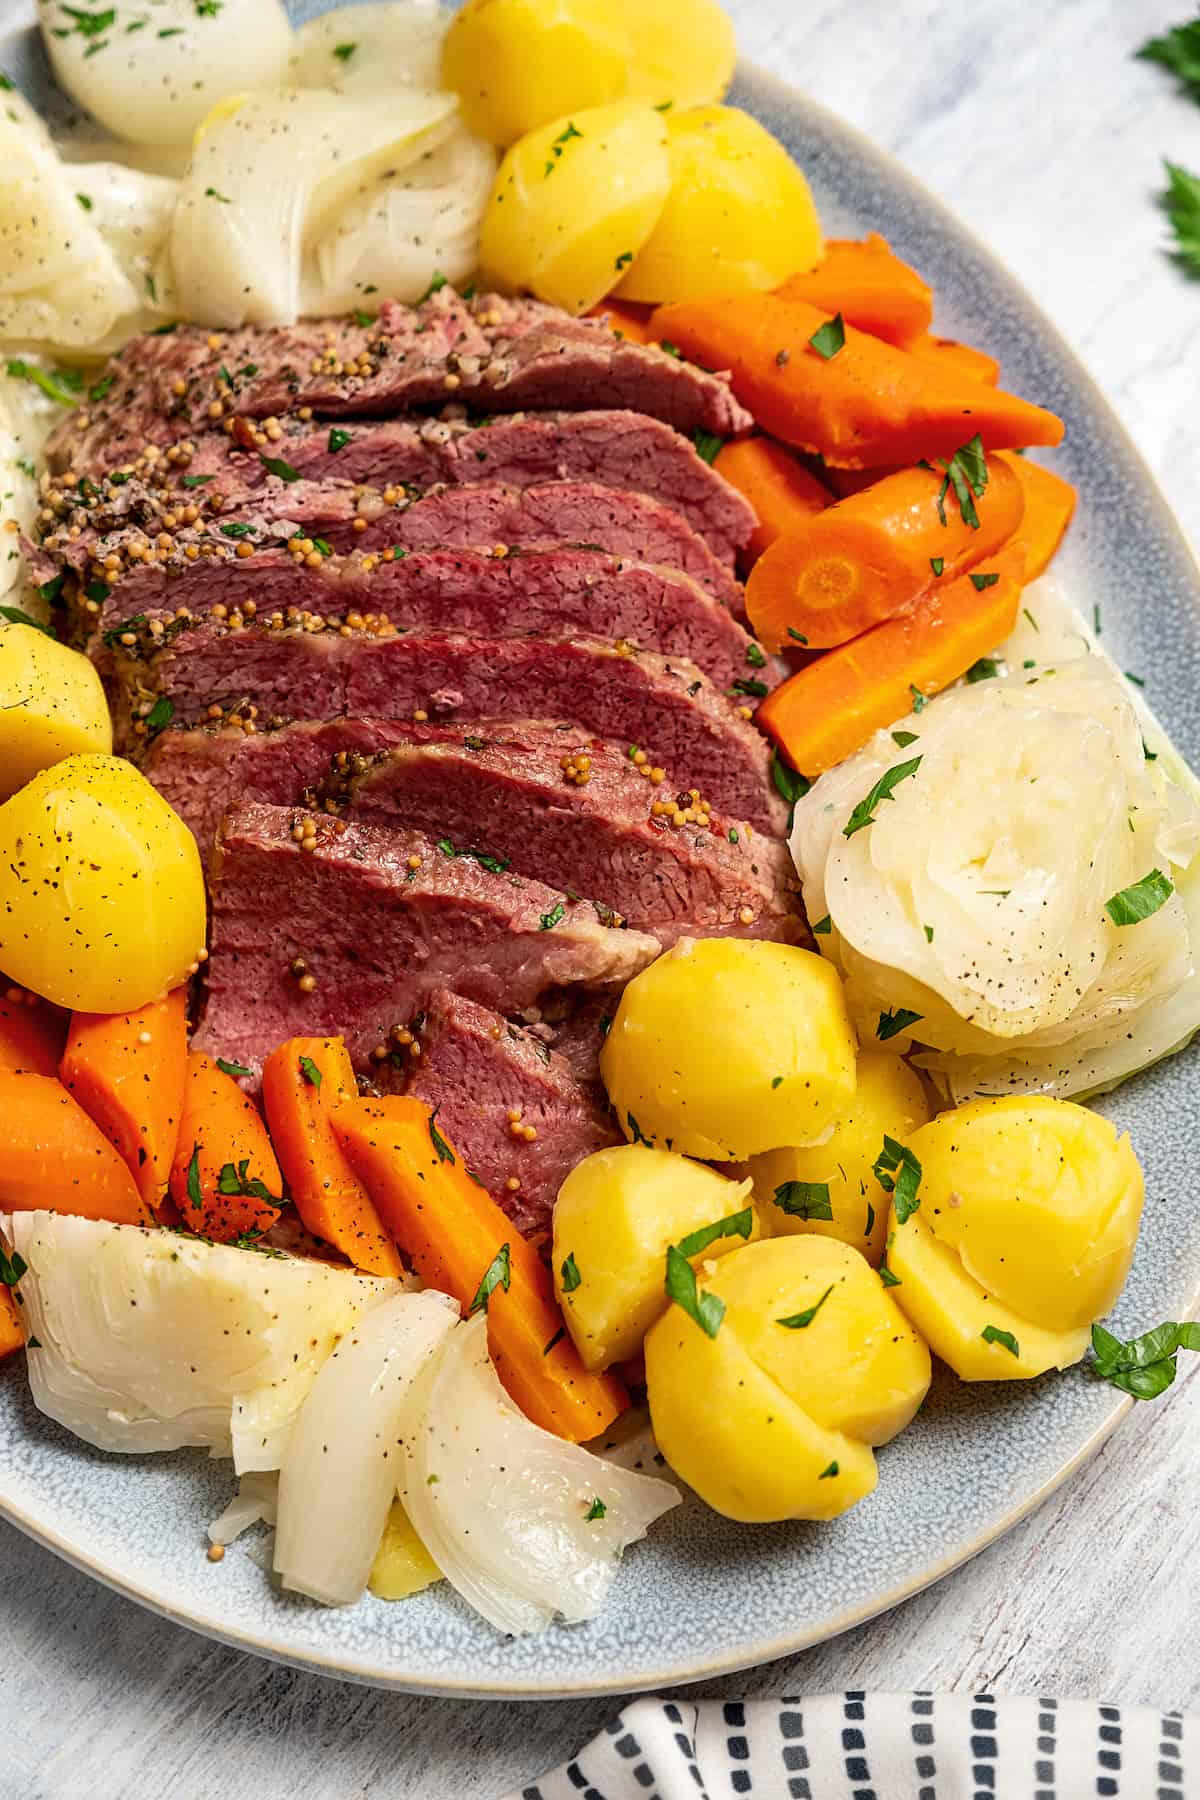 Corned Beef and Cabbage Recipe Image